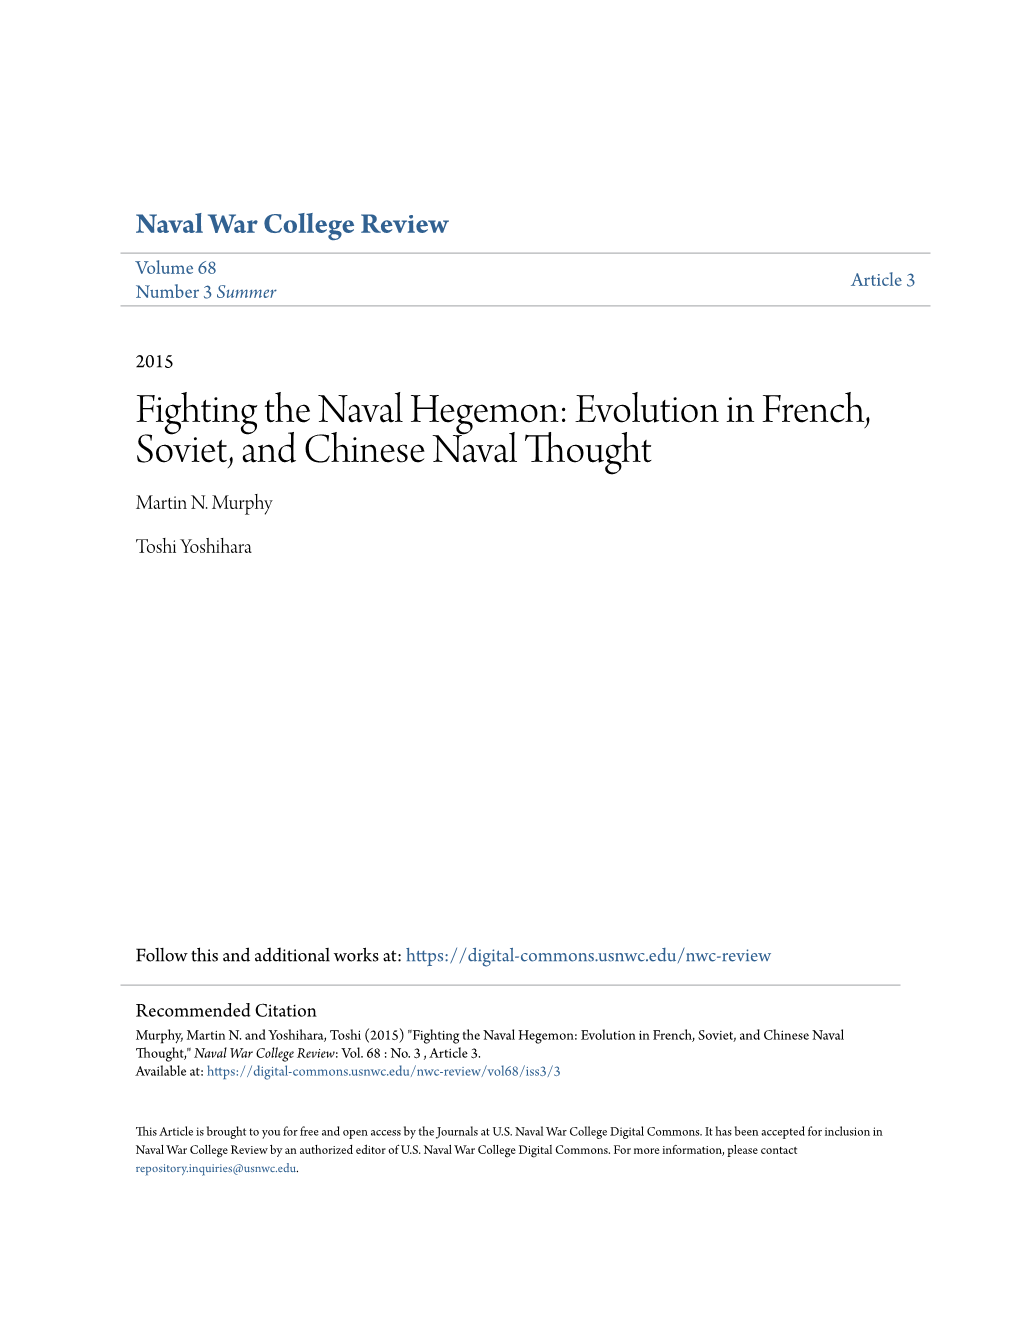 Fighting the Naval Hegemon: Evolution in French, Soviet, and Chinese Naval Thought Martin N